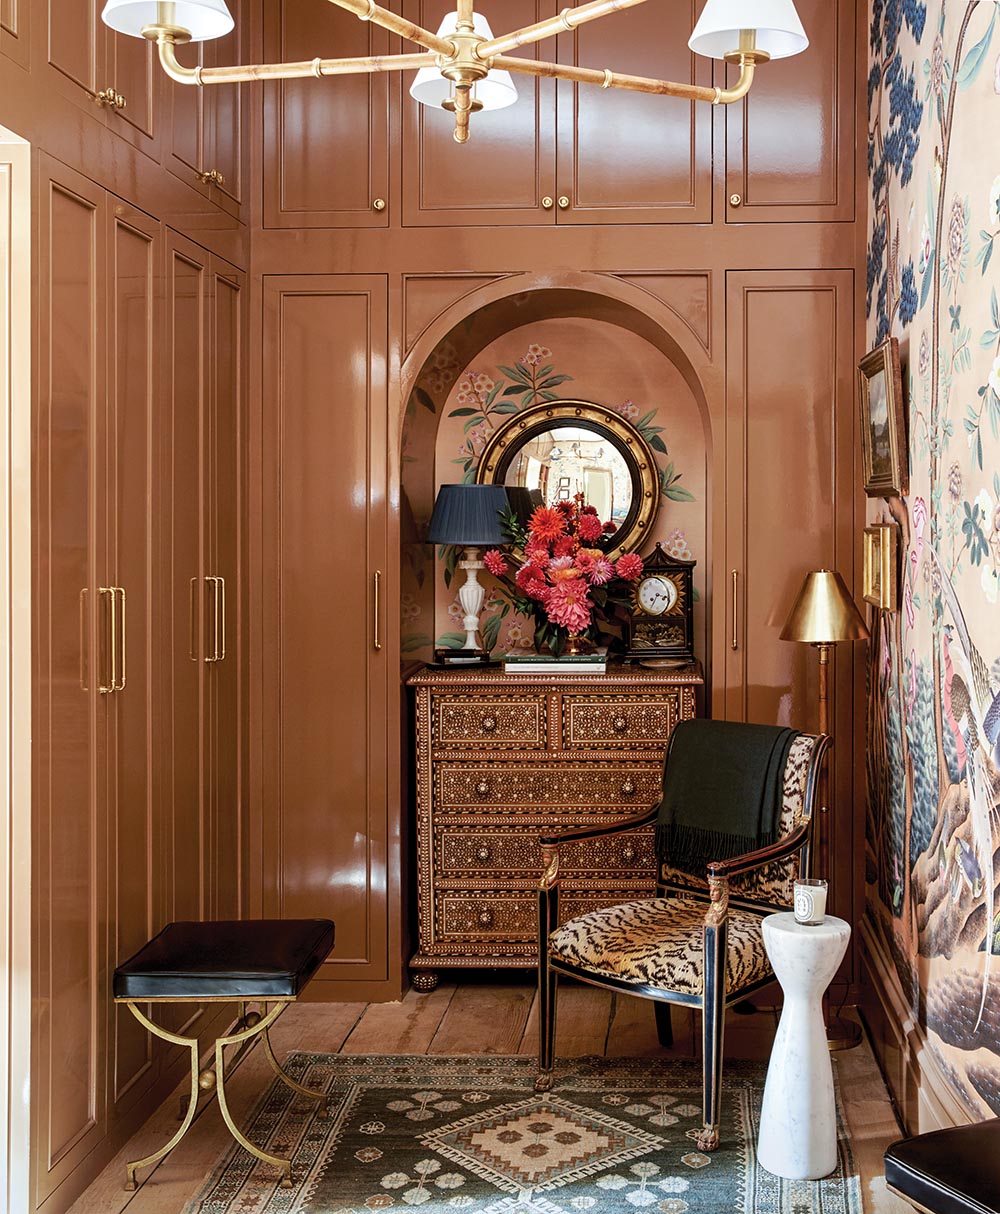 Arched niche with chest that is topped with lamp, arrangement of dahlias and mums, and chinoiserie clock in gentleman's dressing room designed by Nina Long and Don Easterling.